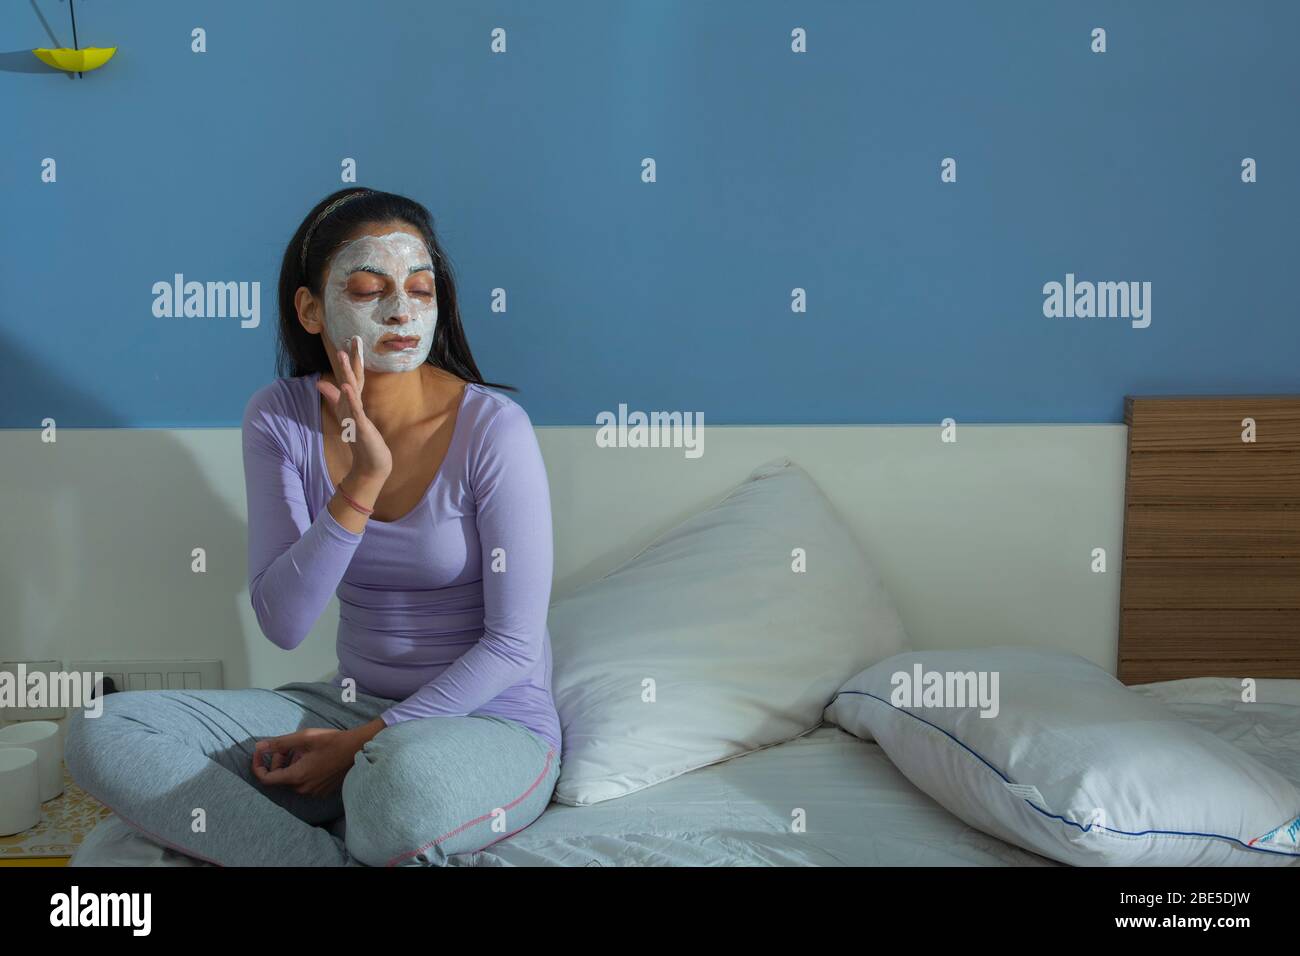 Young woman applying face-pack on her face. Stock Photo